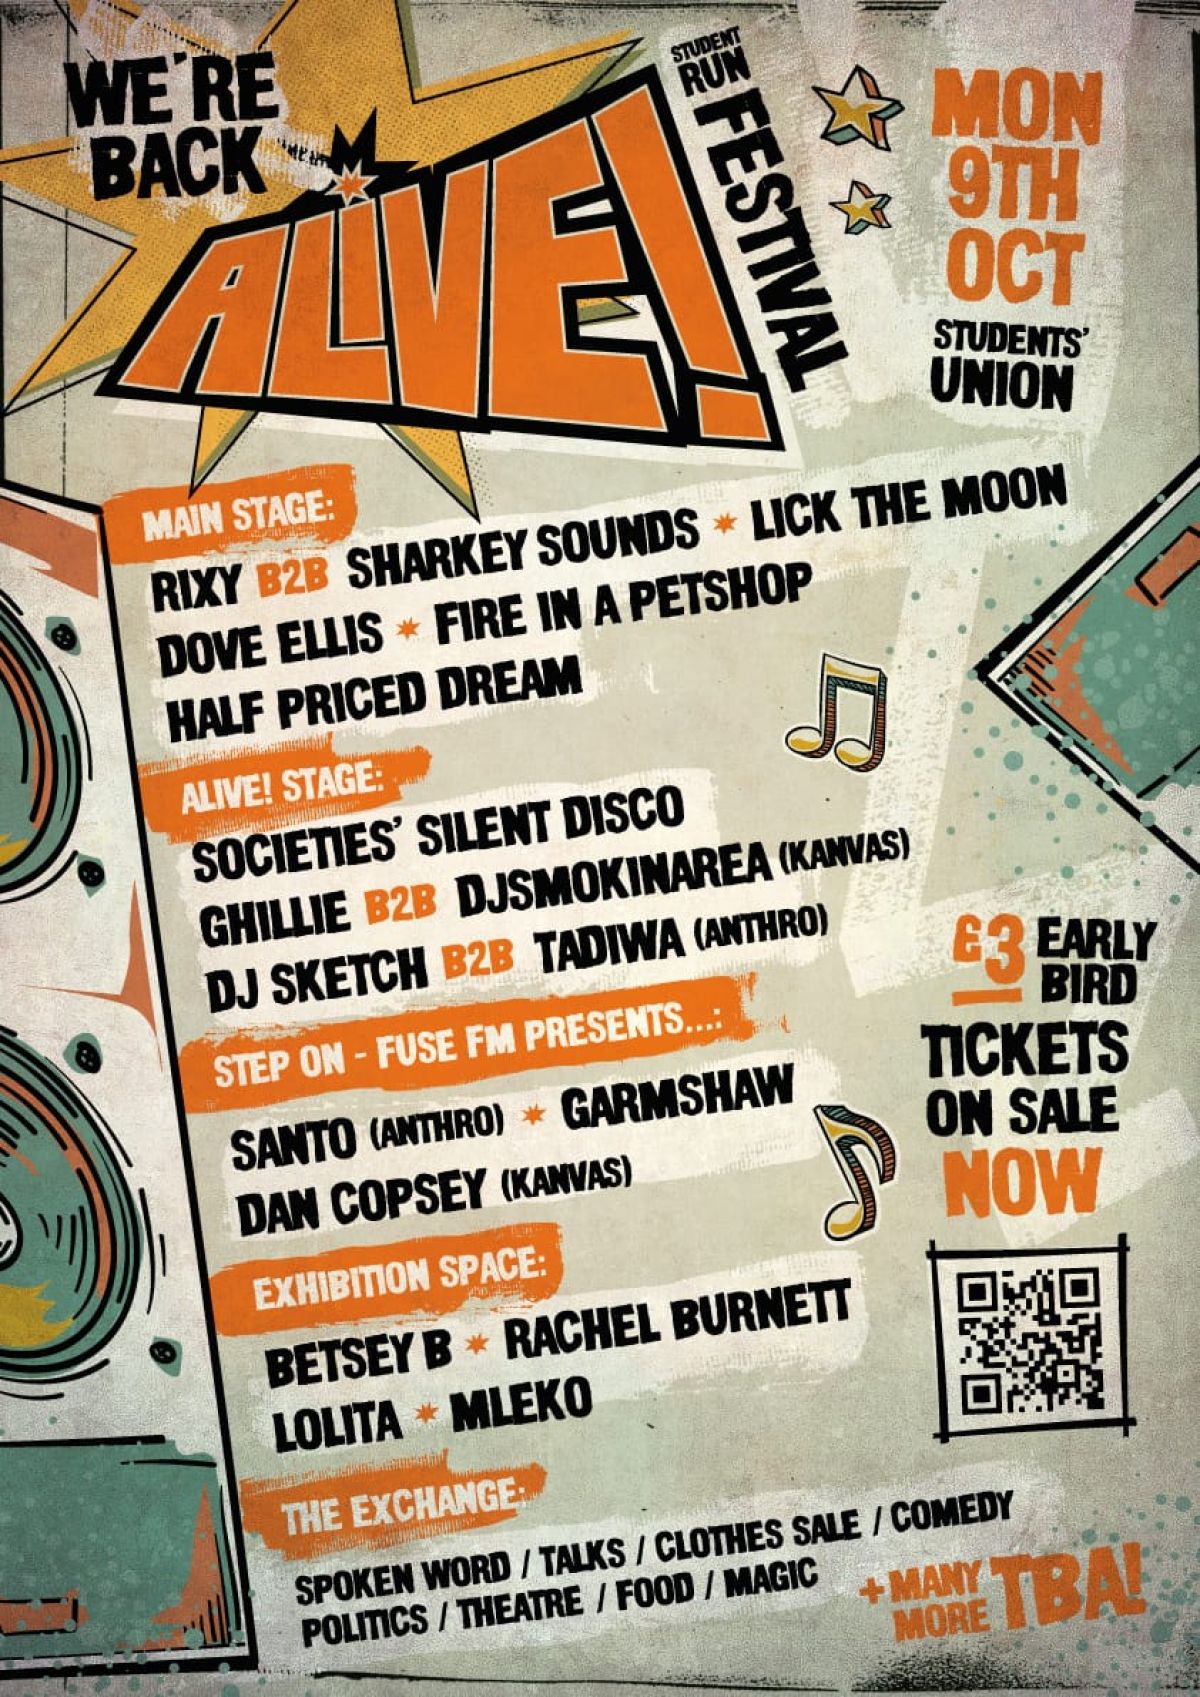 Alive Festival: All you need to know